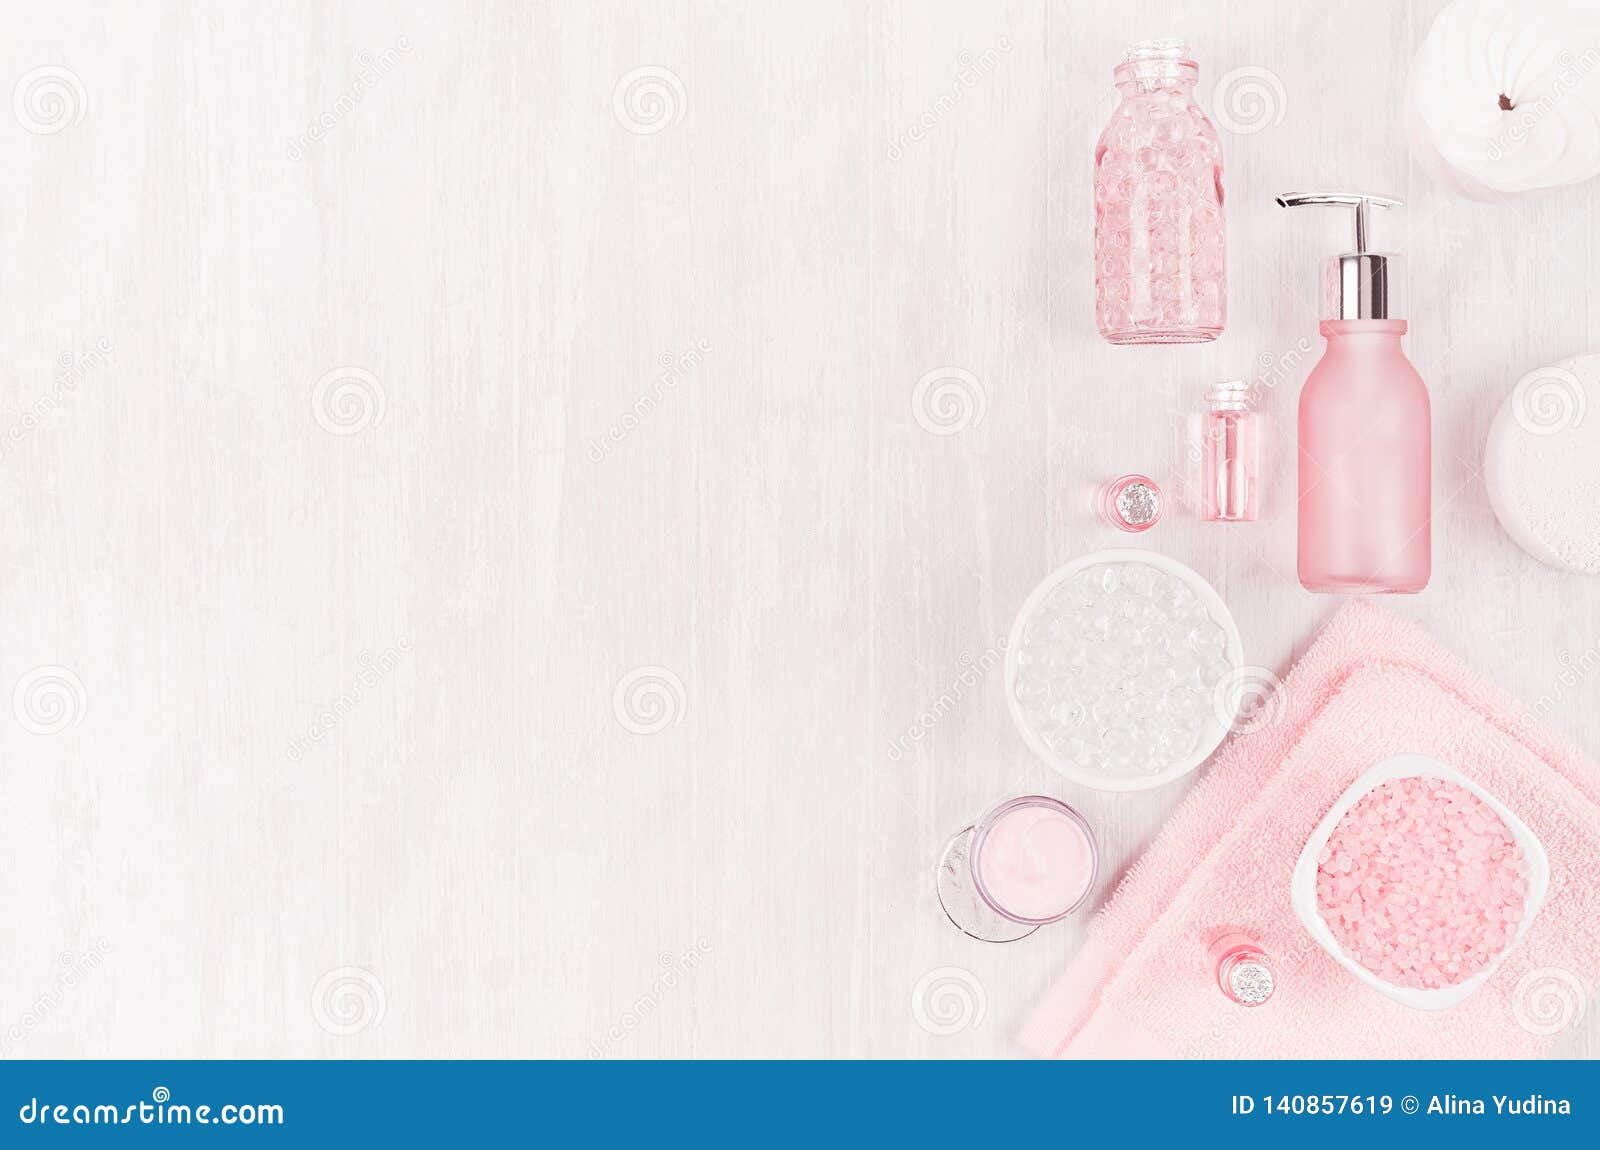 Different cosmetic products and accessories in pink and silver